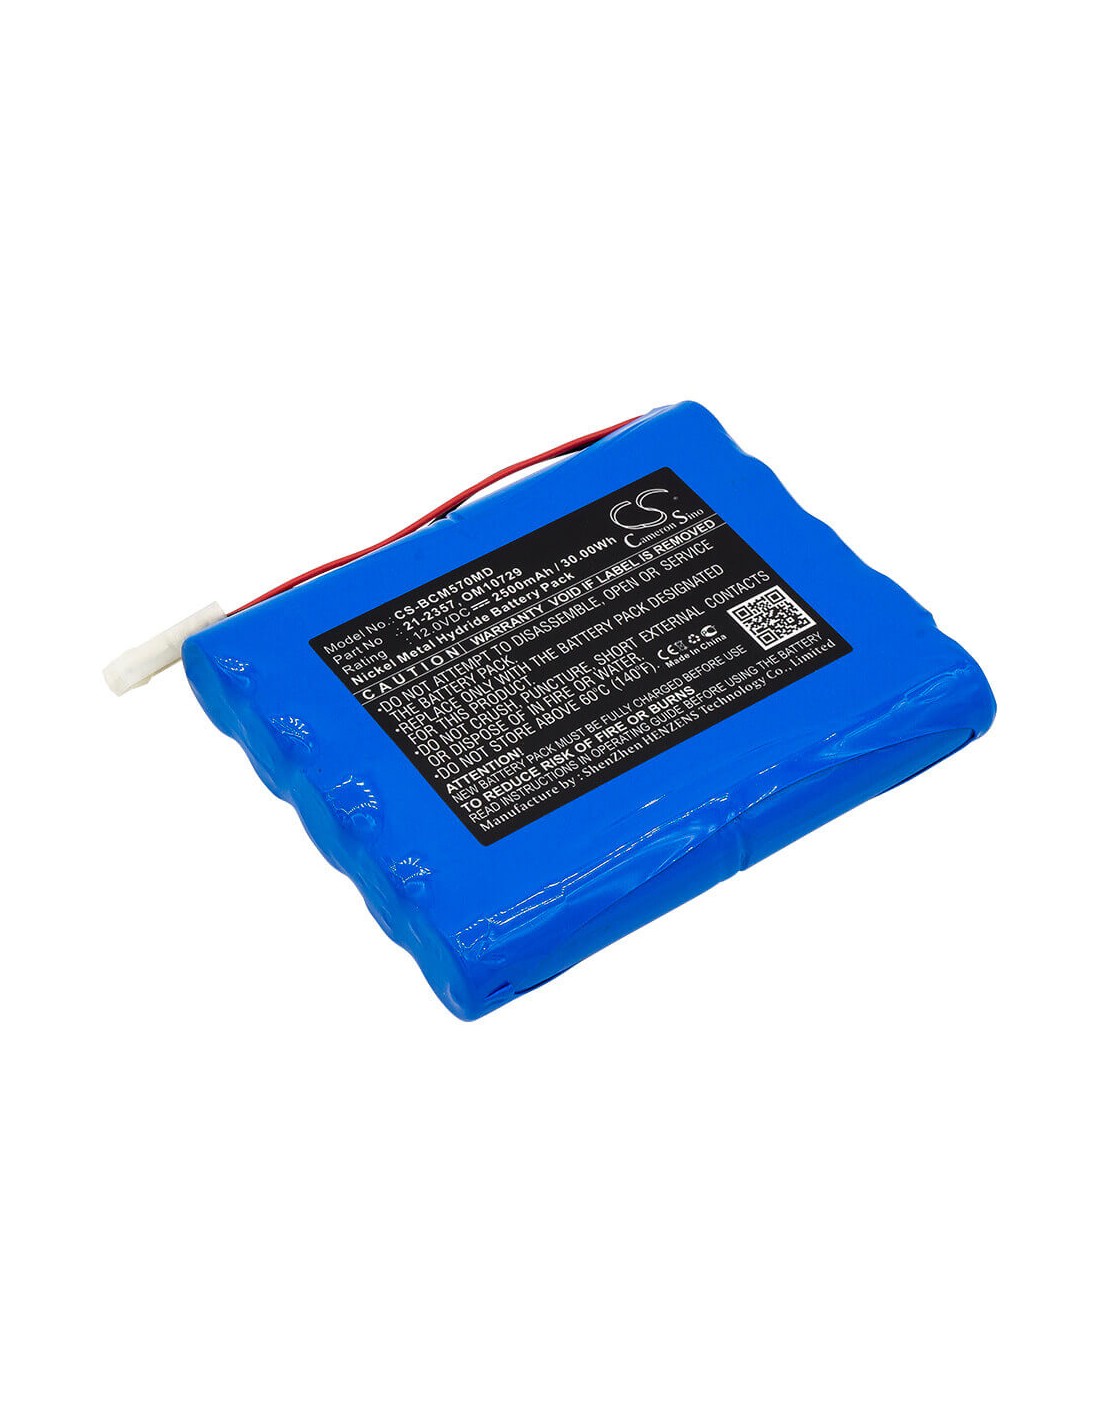 Battery for Bci, Cadd Tpn 5700 Infusion Pump, Tpn 5700 Infusio 12V, 2500mAh - 30.00Wh